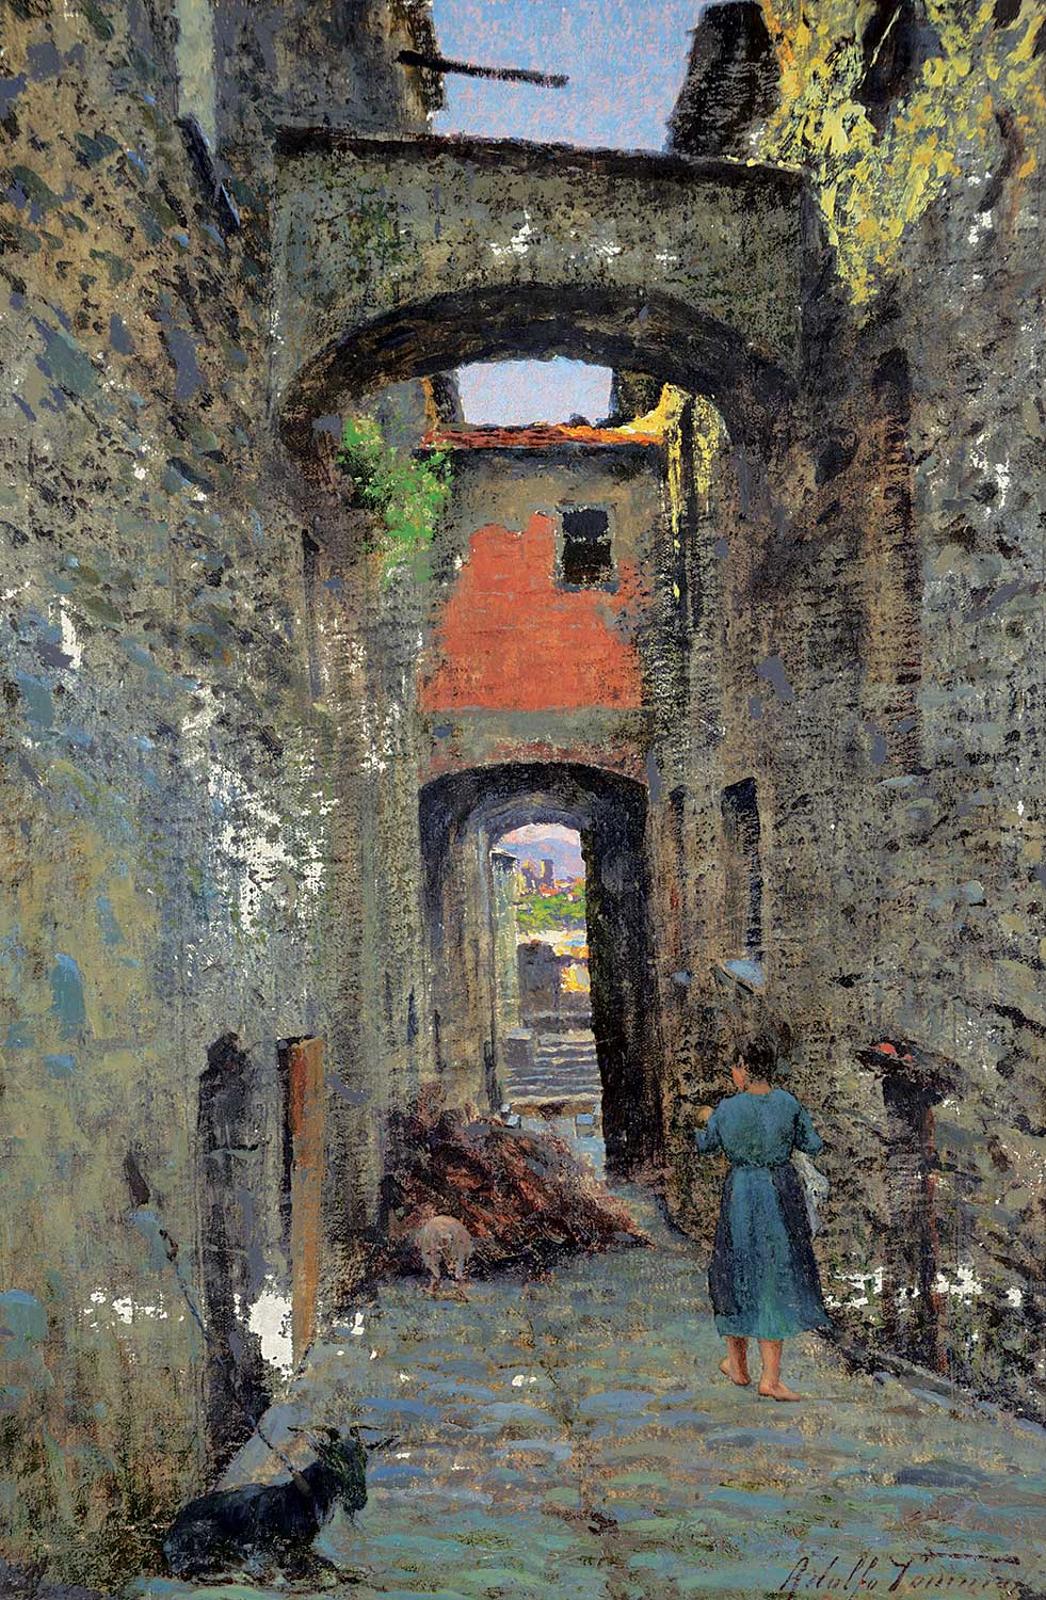 Adolfo Tommasi - Untitled - Back Streets of Naples